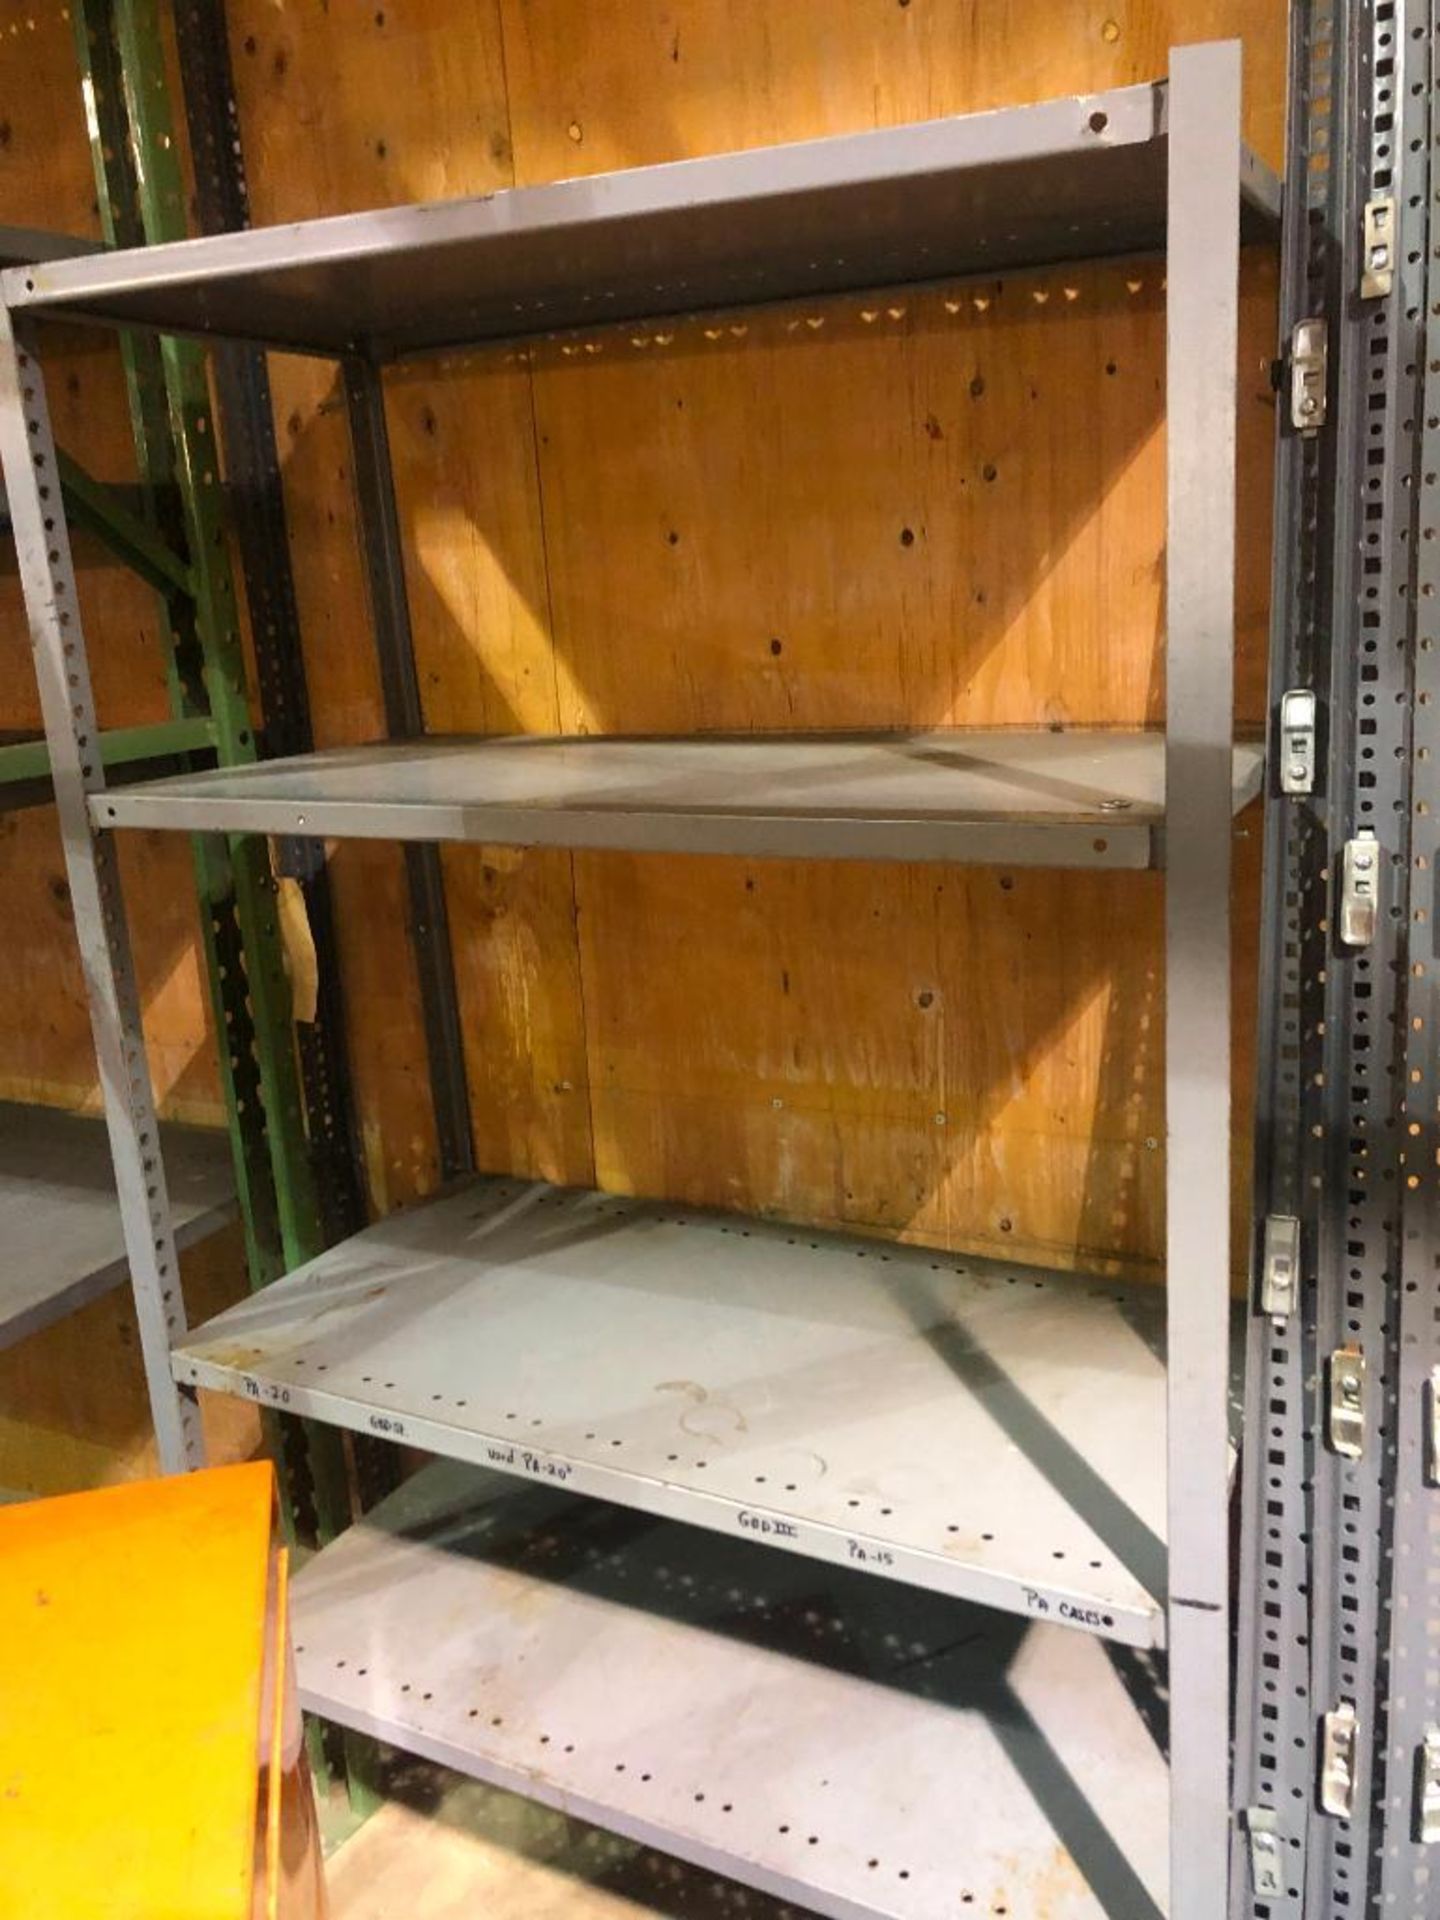 (7) SECTIONS OF METAL SHELVES